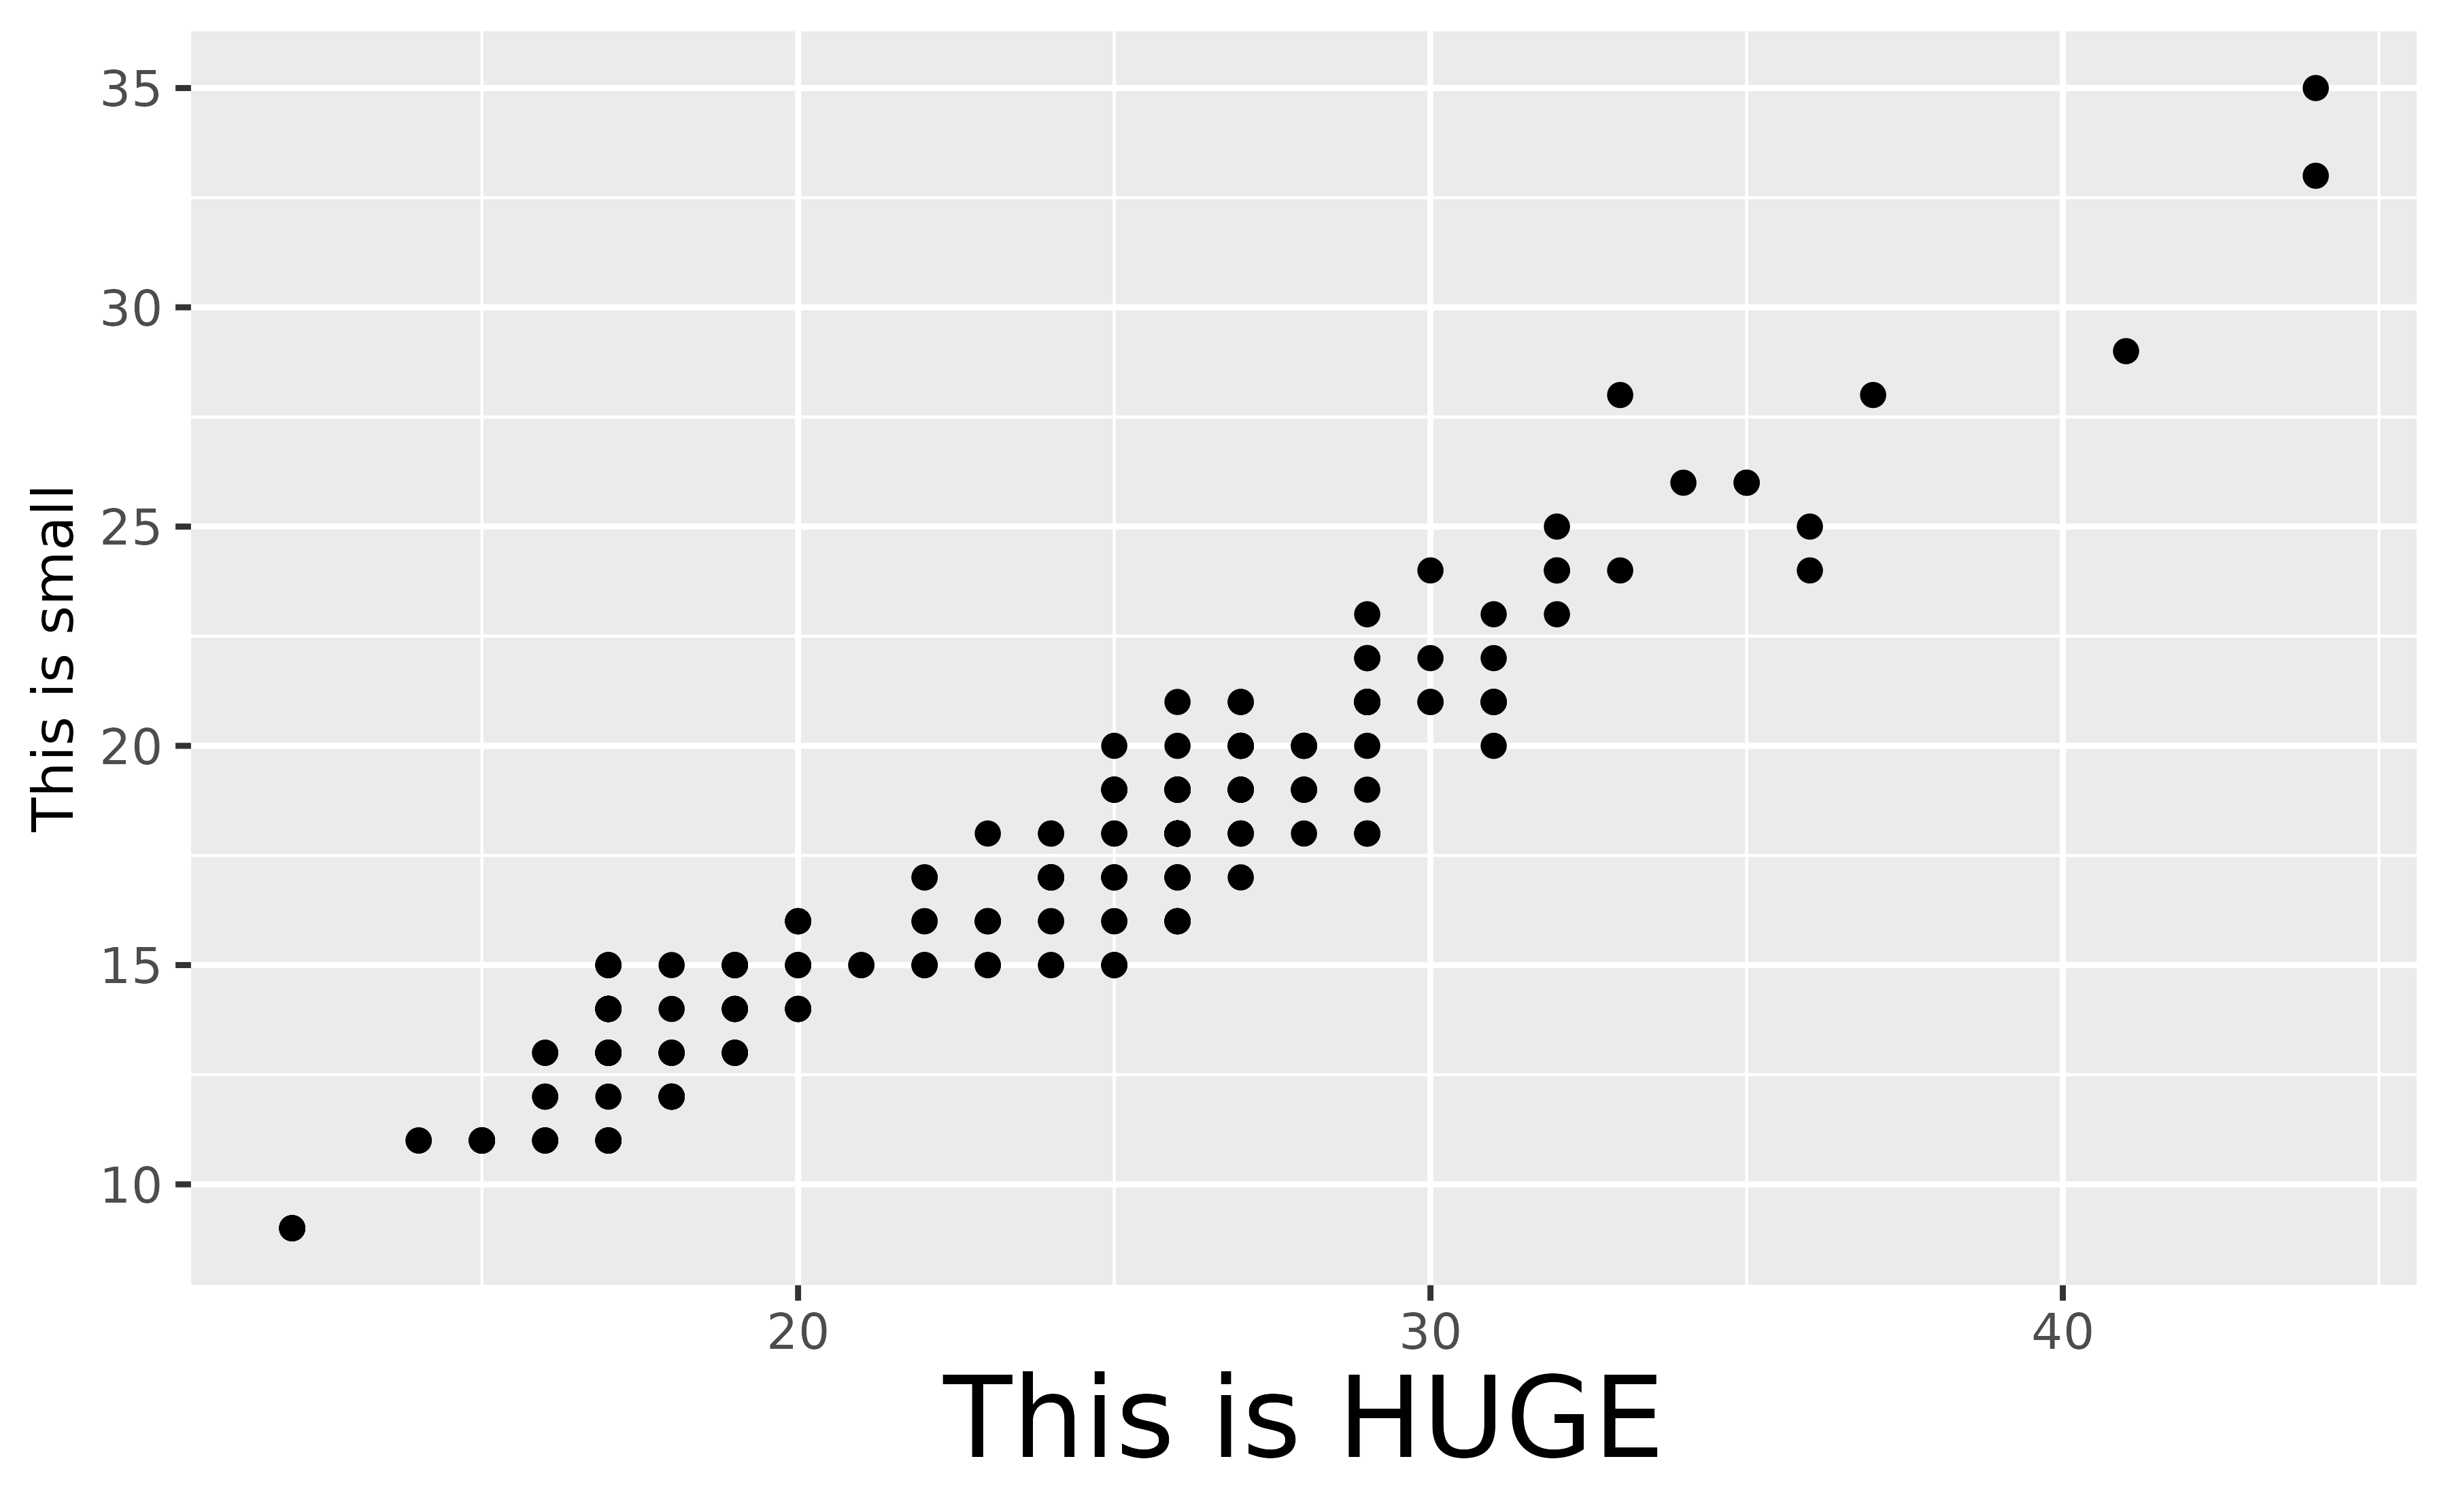 A scatter plot showing the highway miles per gallon on the x-axis and city miles per gallon on the y-axis. The x-axis title displays 'This is HUGE' in a large font size, and the y-axis title displays 'This is small' in a smaller font size.